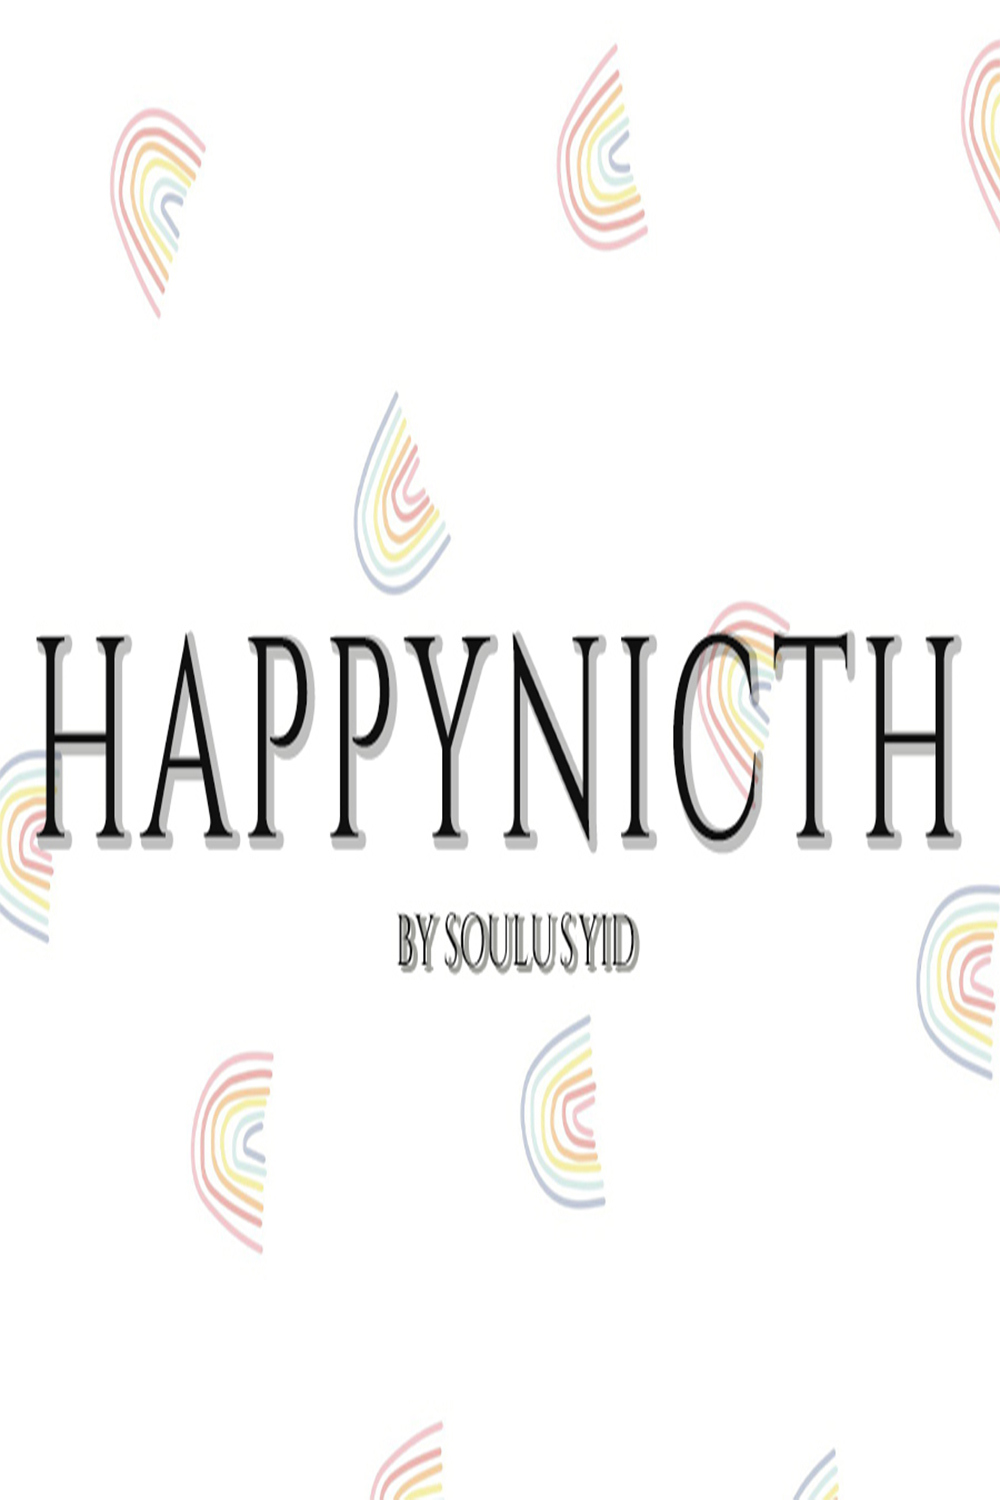 Happynicth pinterest preview image.